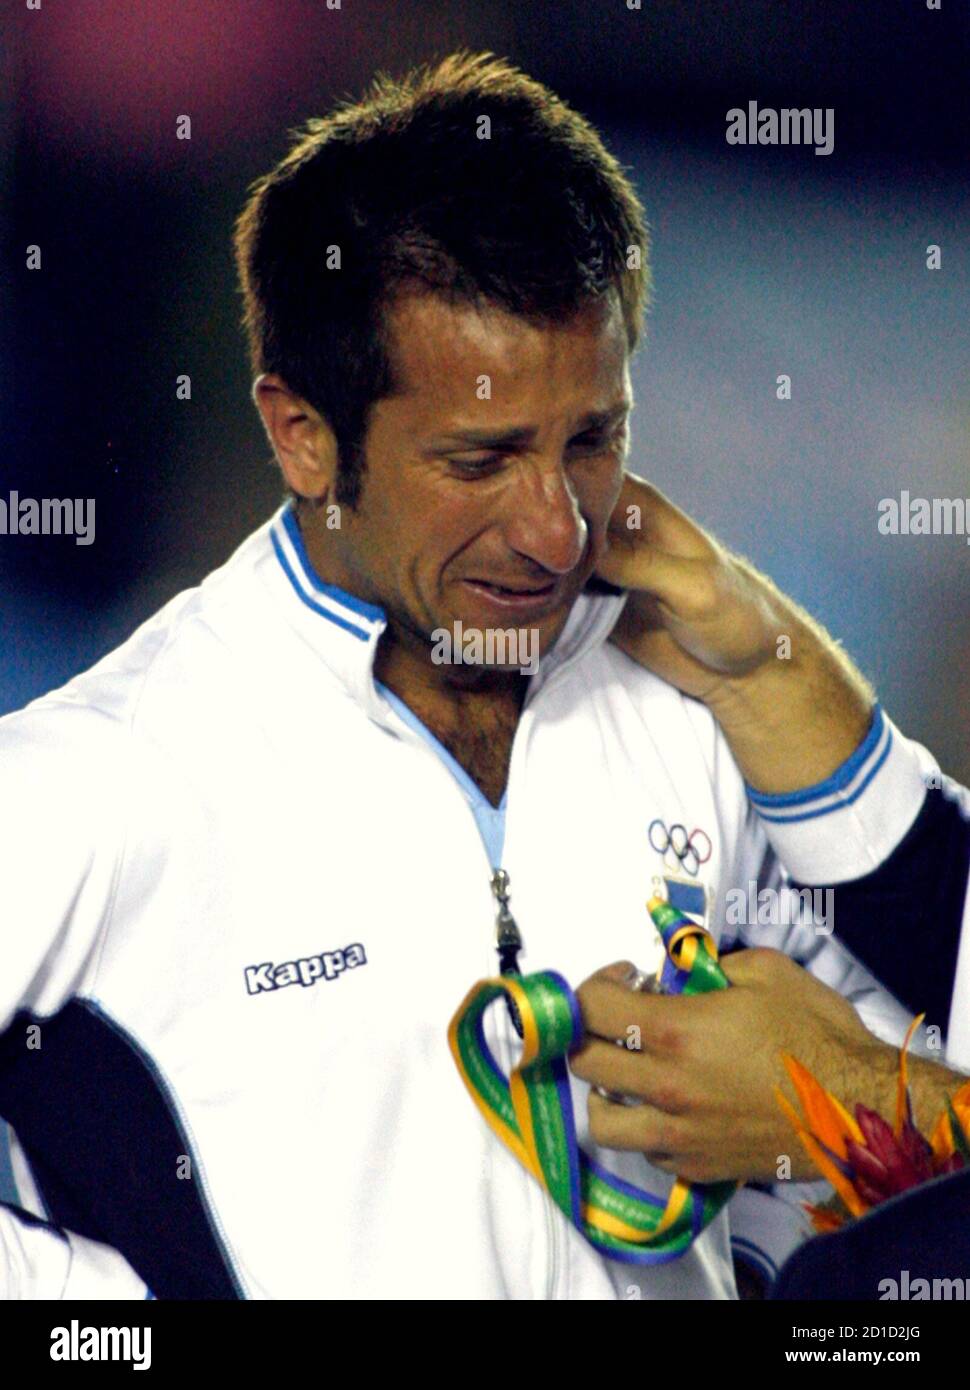 Argentina's captain Mario reacts at the podium during the award ceremony of the men's field hockey final match at the Pan American Games Rio De Janeiro, July 25, 2007. Canada